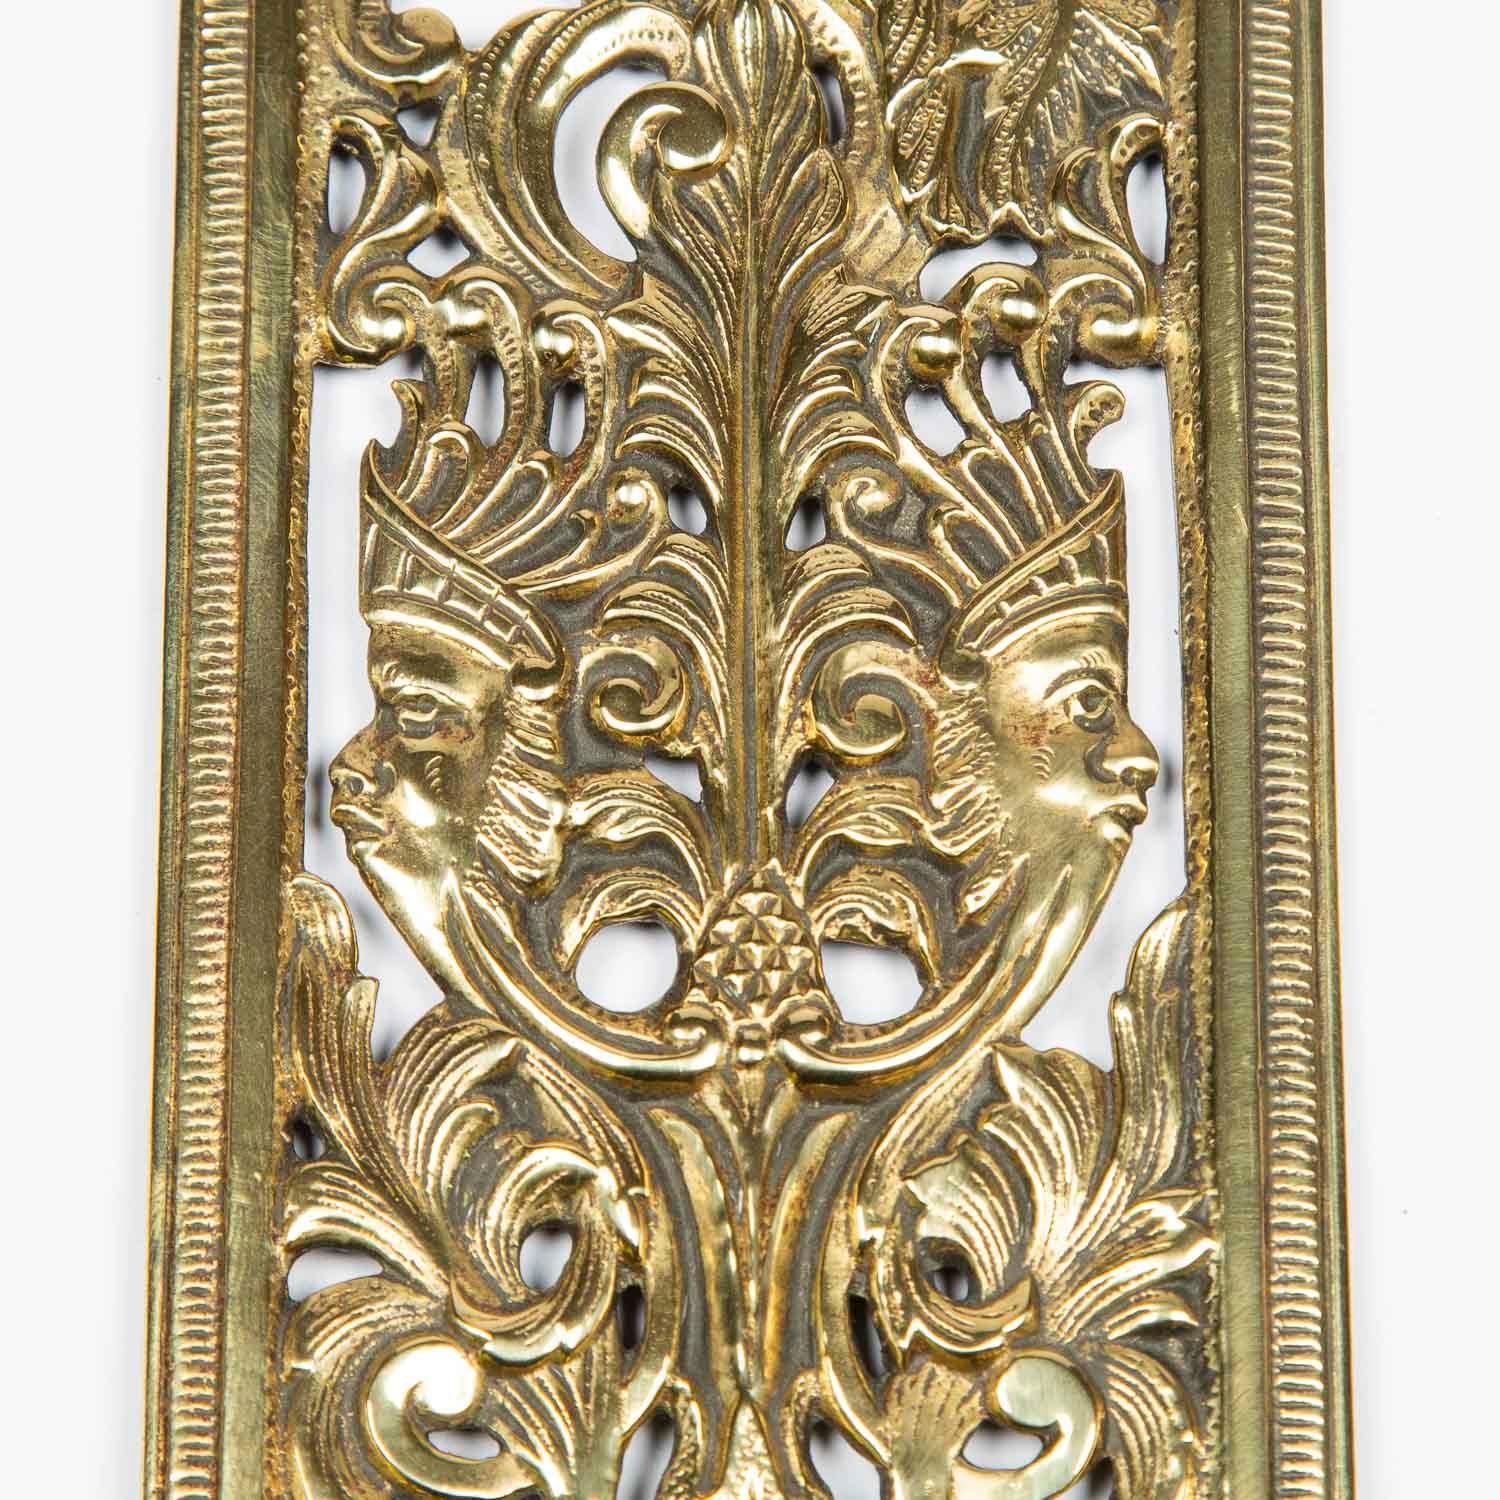 19th Century Large Brass Door Lock Plate by James Cartland & Sons